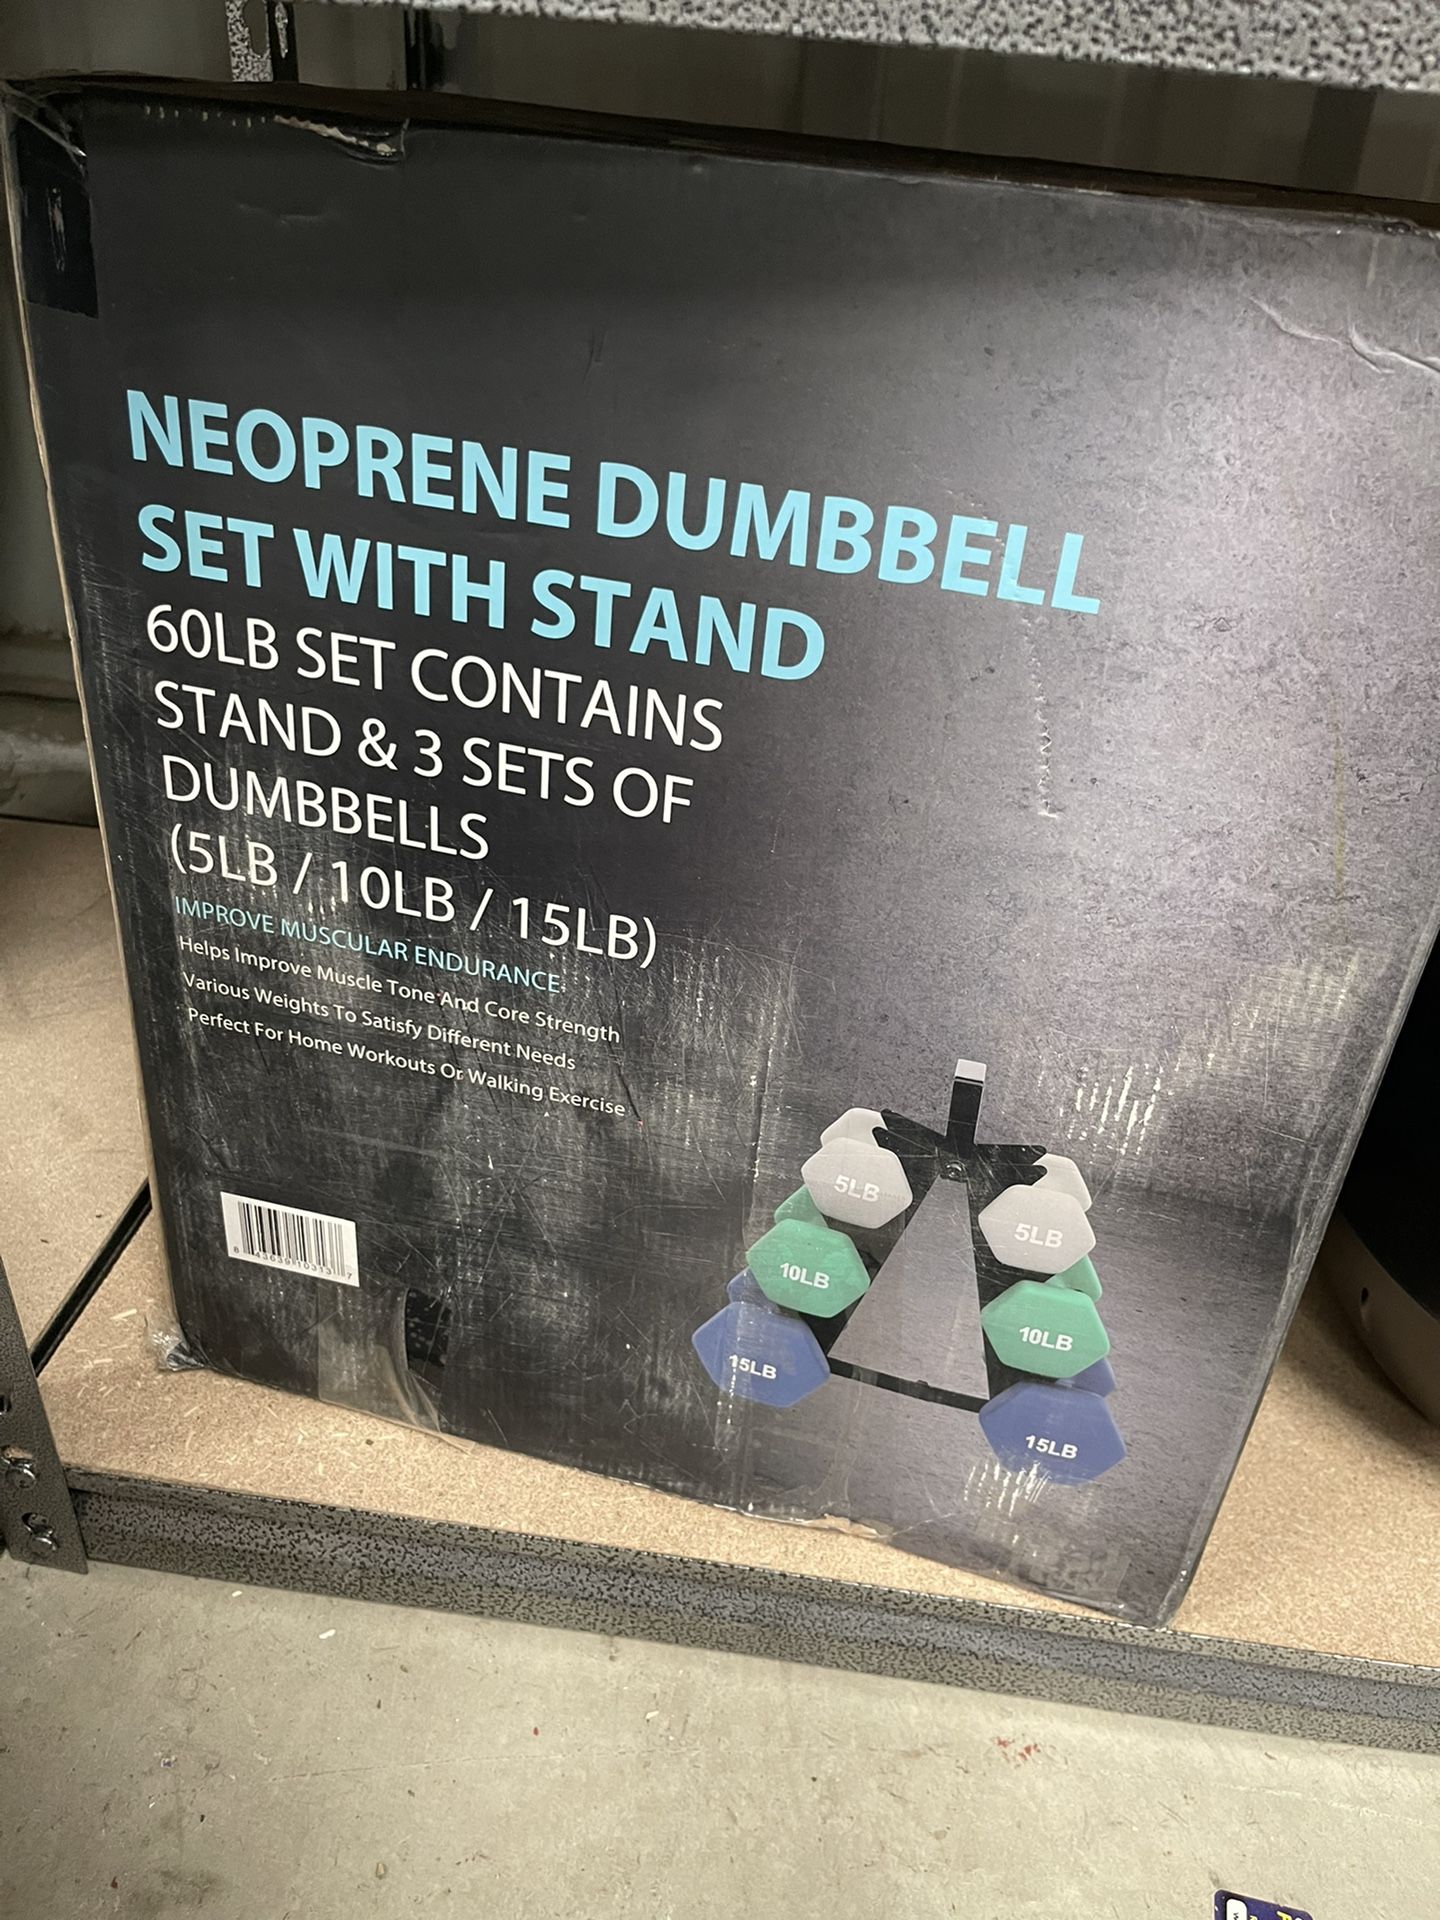 NEOPRENE DUMBBELL SET WITH STAND 60LB SET CONTAINS STAND & 3 SETS OF DUMBBELLS (5LB / 10LB / 15LB)